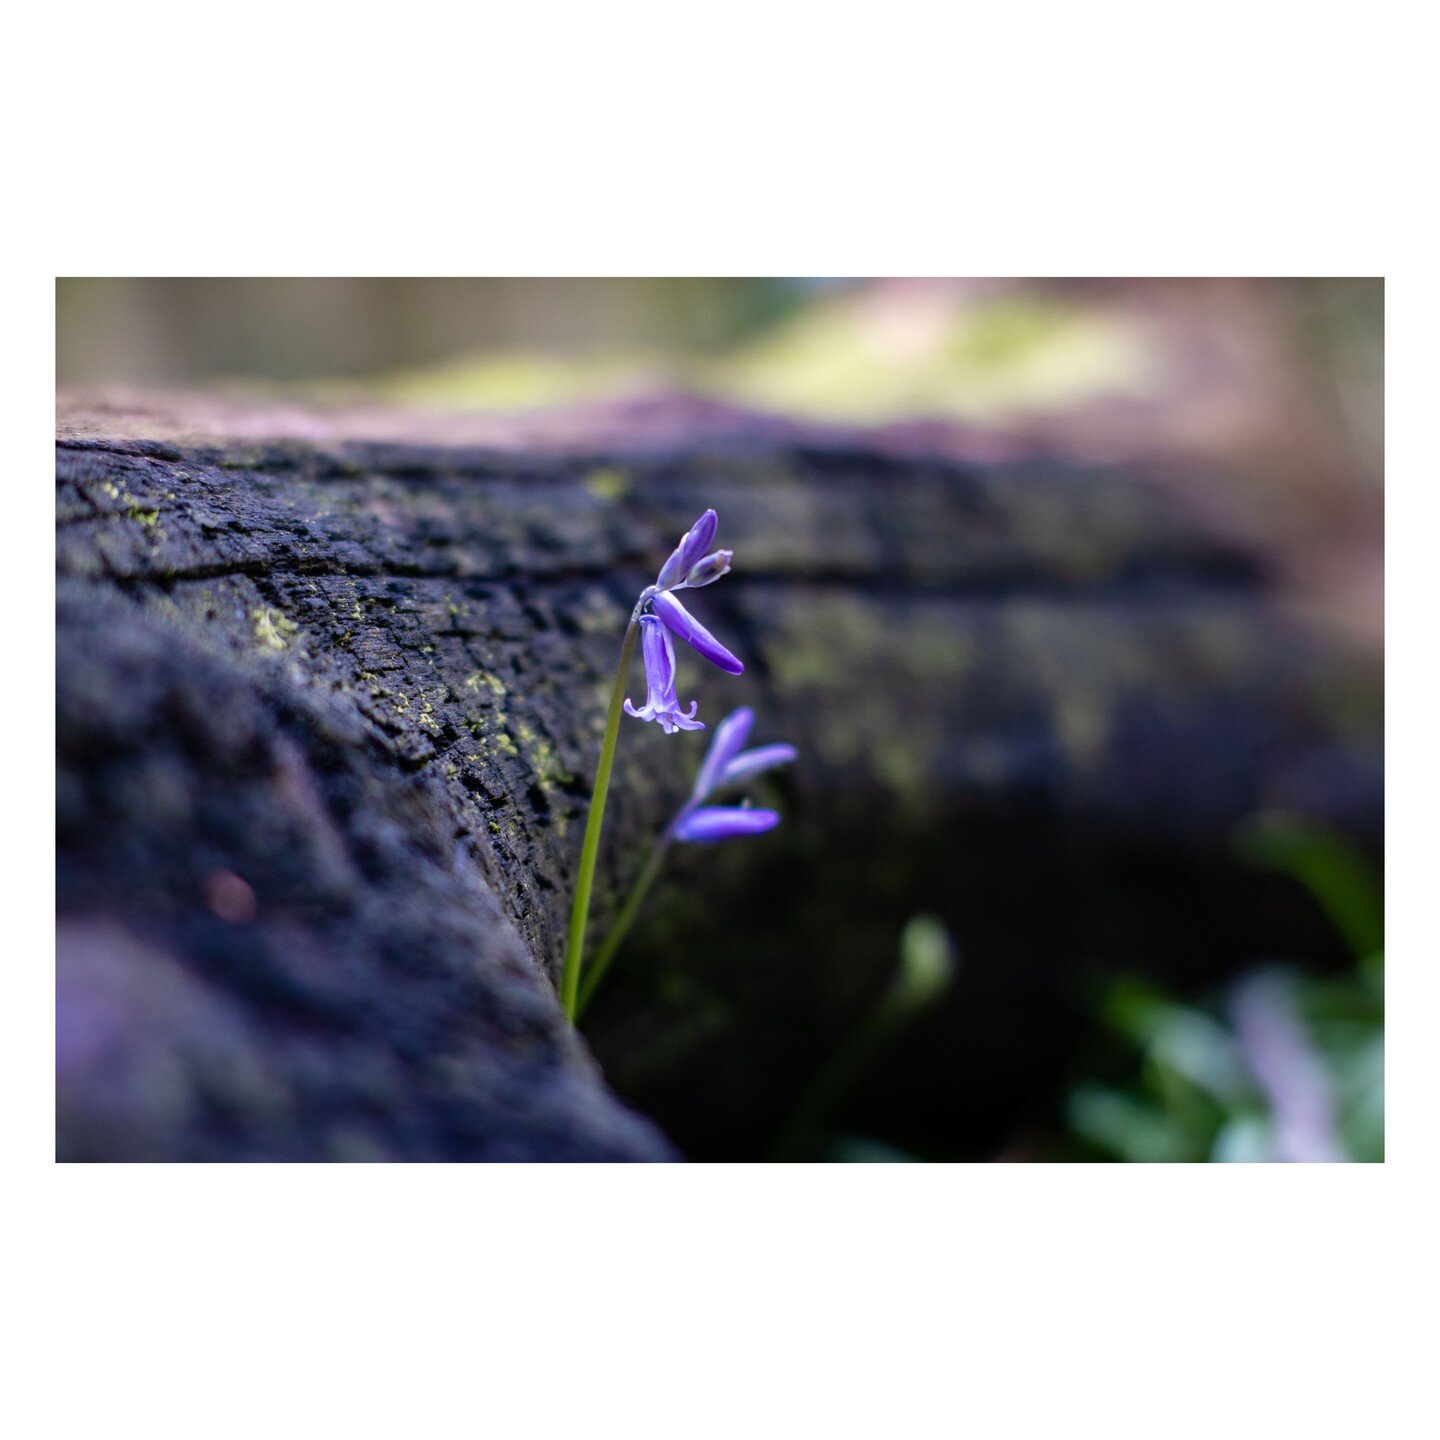 looking for the bluebells, they were just making an appearance, a few more weeks and they will be fully blooming. 111 of 365, no reason other than the joy of image making.

.
.
.
.
.
.
.
.
.
#instagramers #photodrome #photooftheday #picoftheday #alem